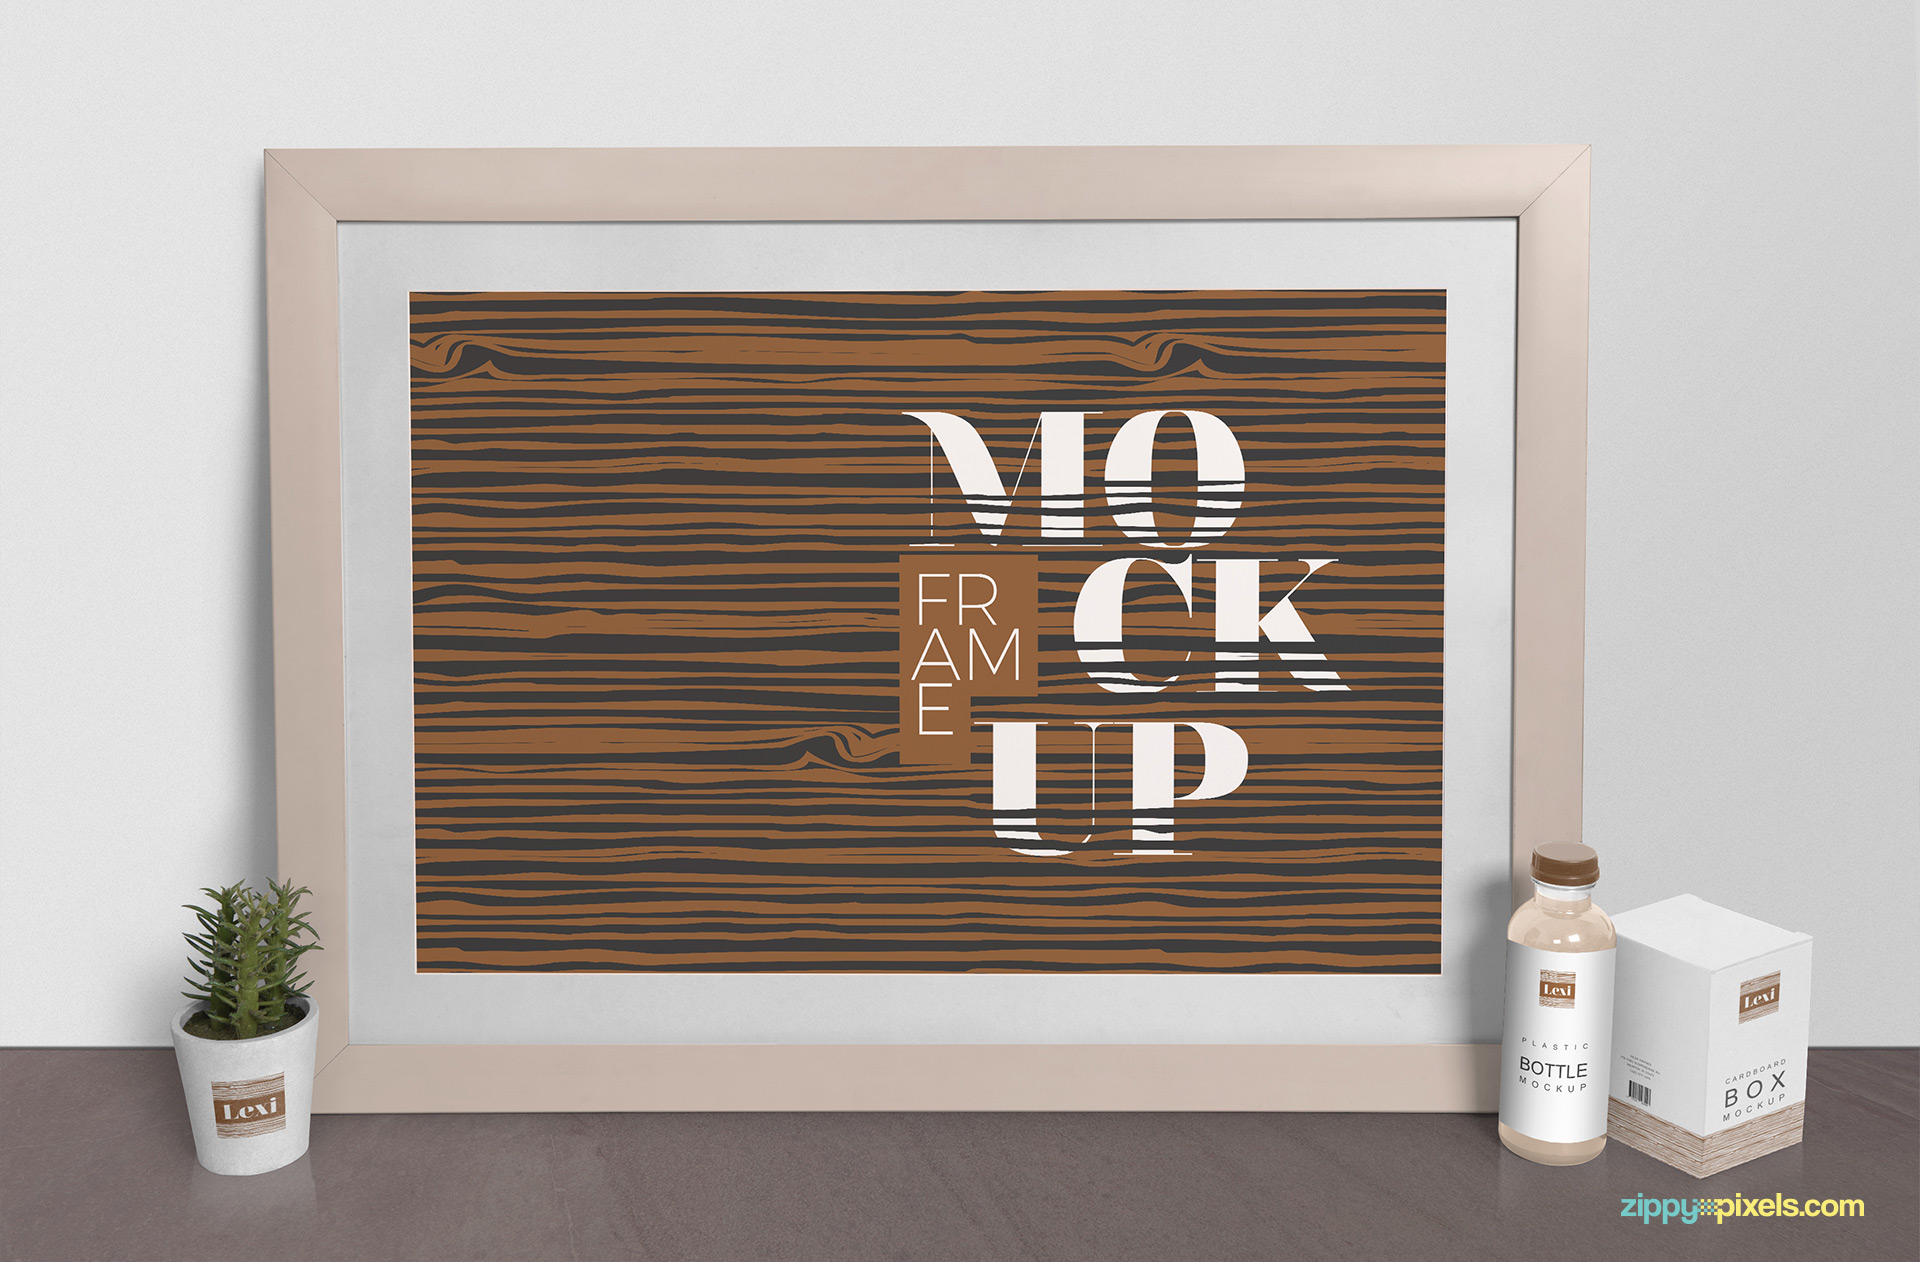 Realistic effects of picture frame mockup.